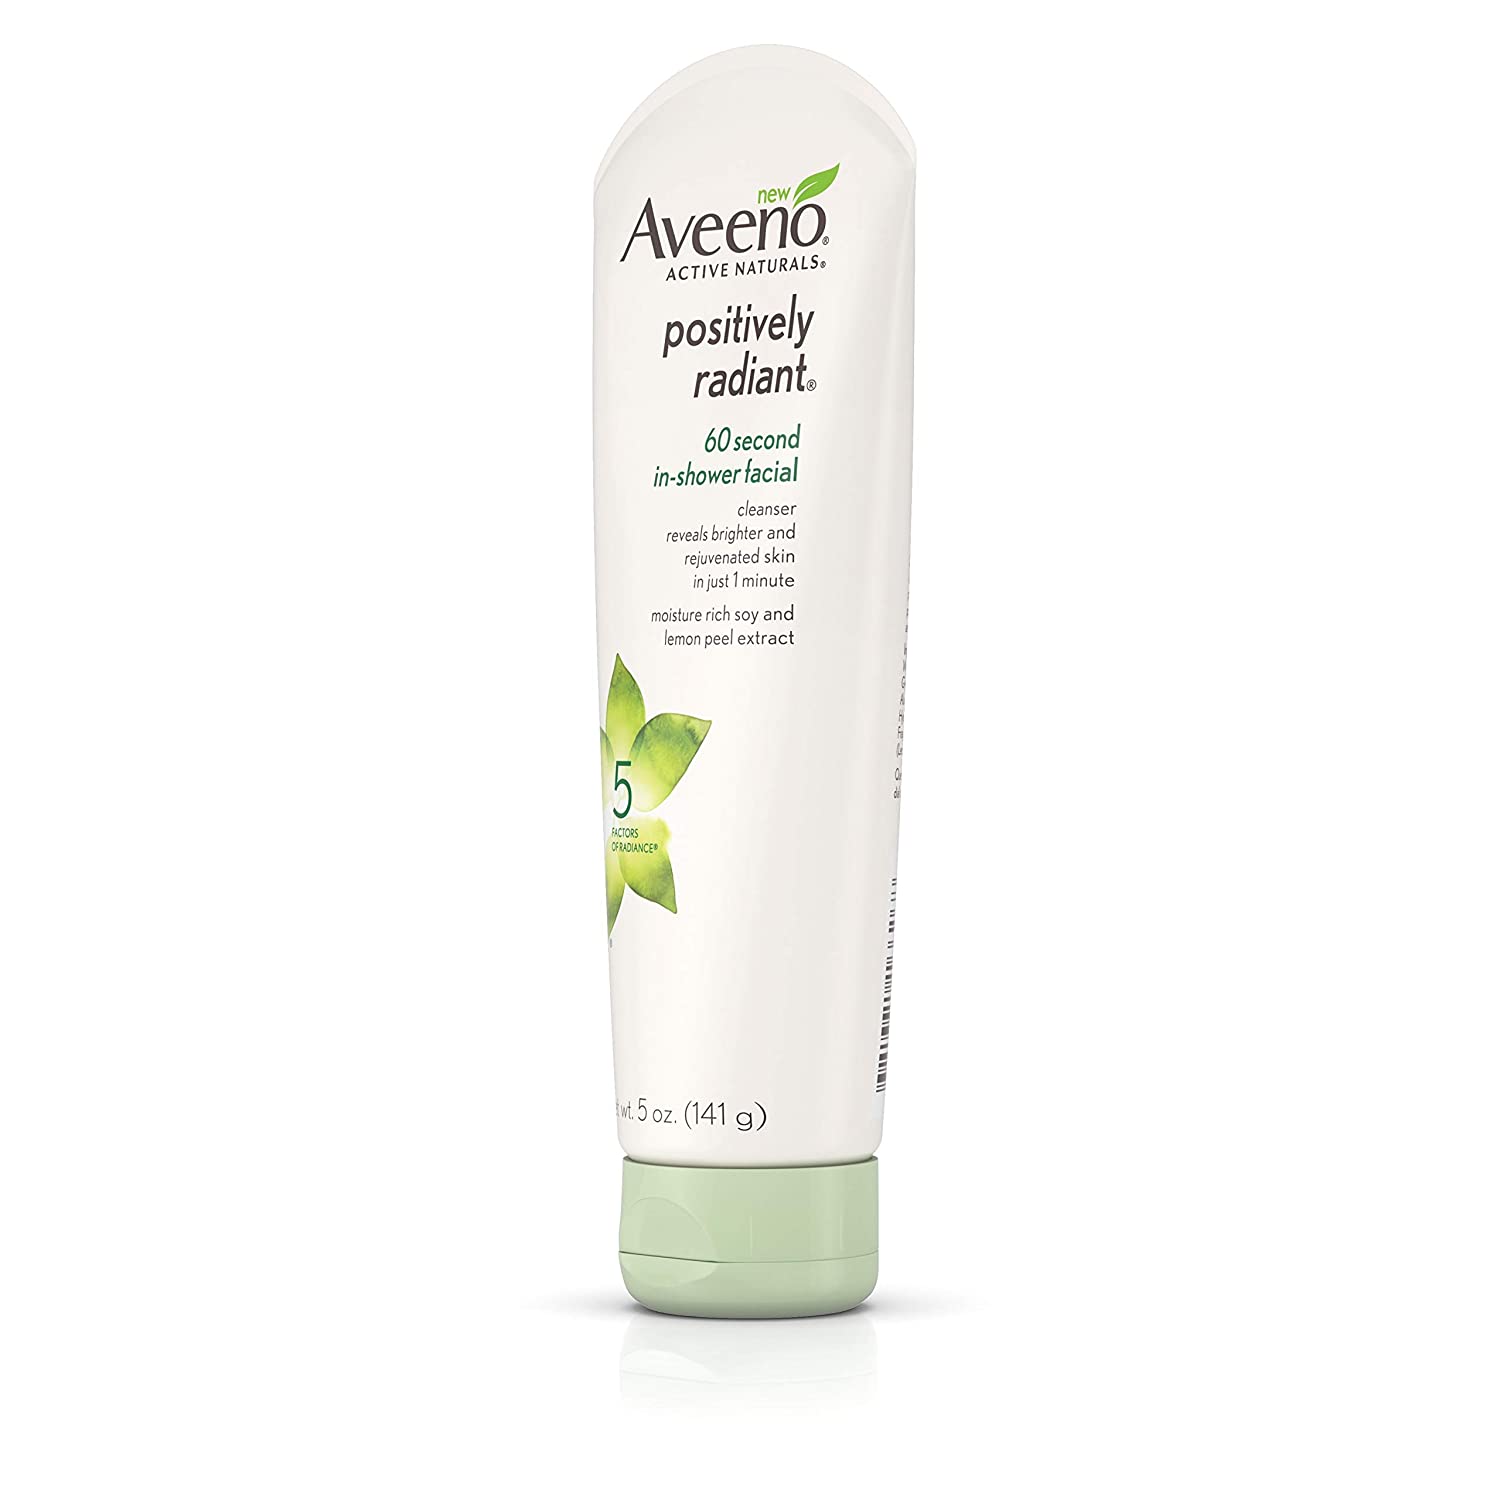 Aveeno Active Naturals Positively Radiant 60 Second In-Shower Facial Cleanser 5 oz (Pack of 4) - image 4 of 7